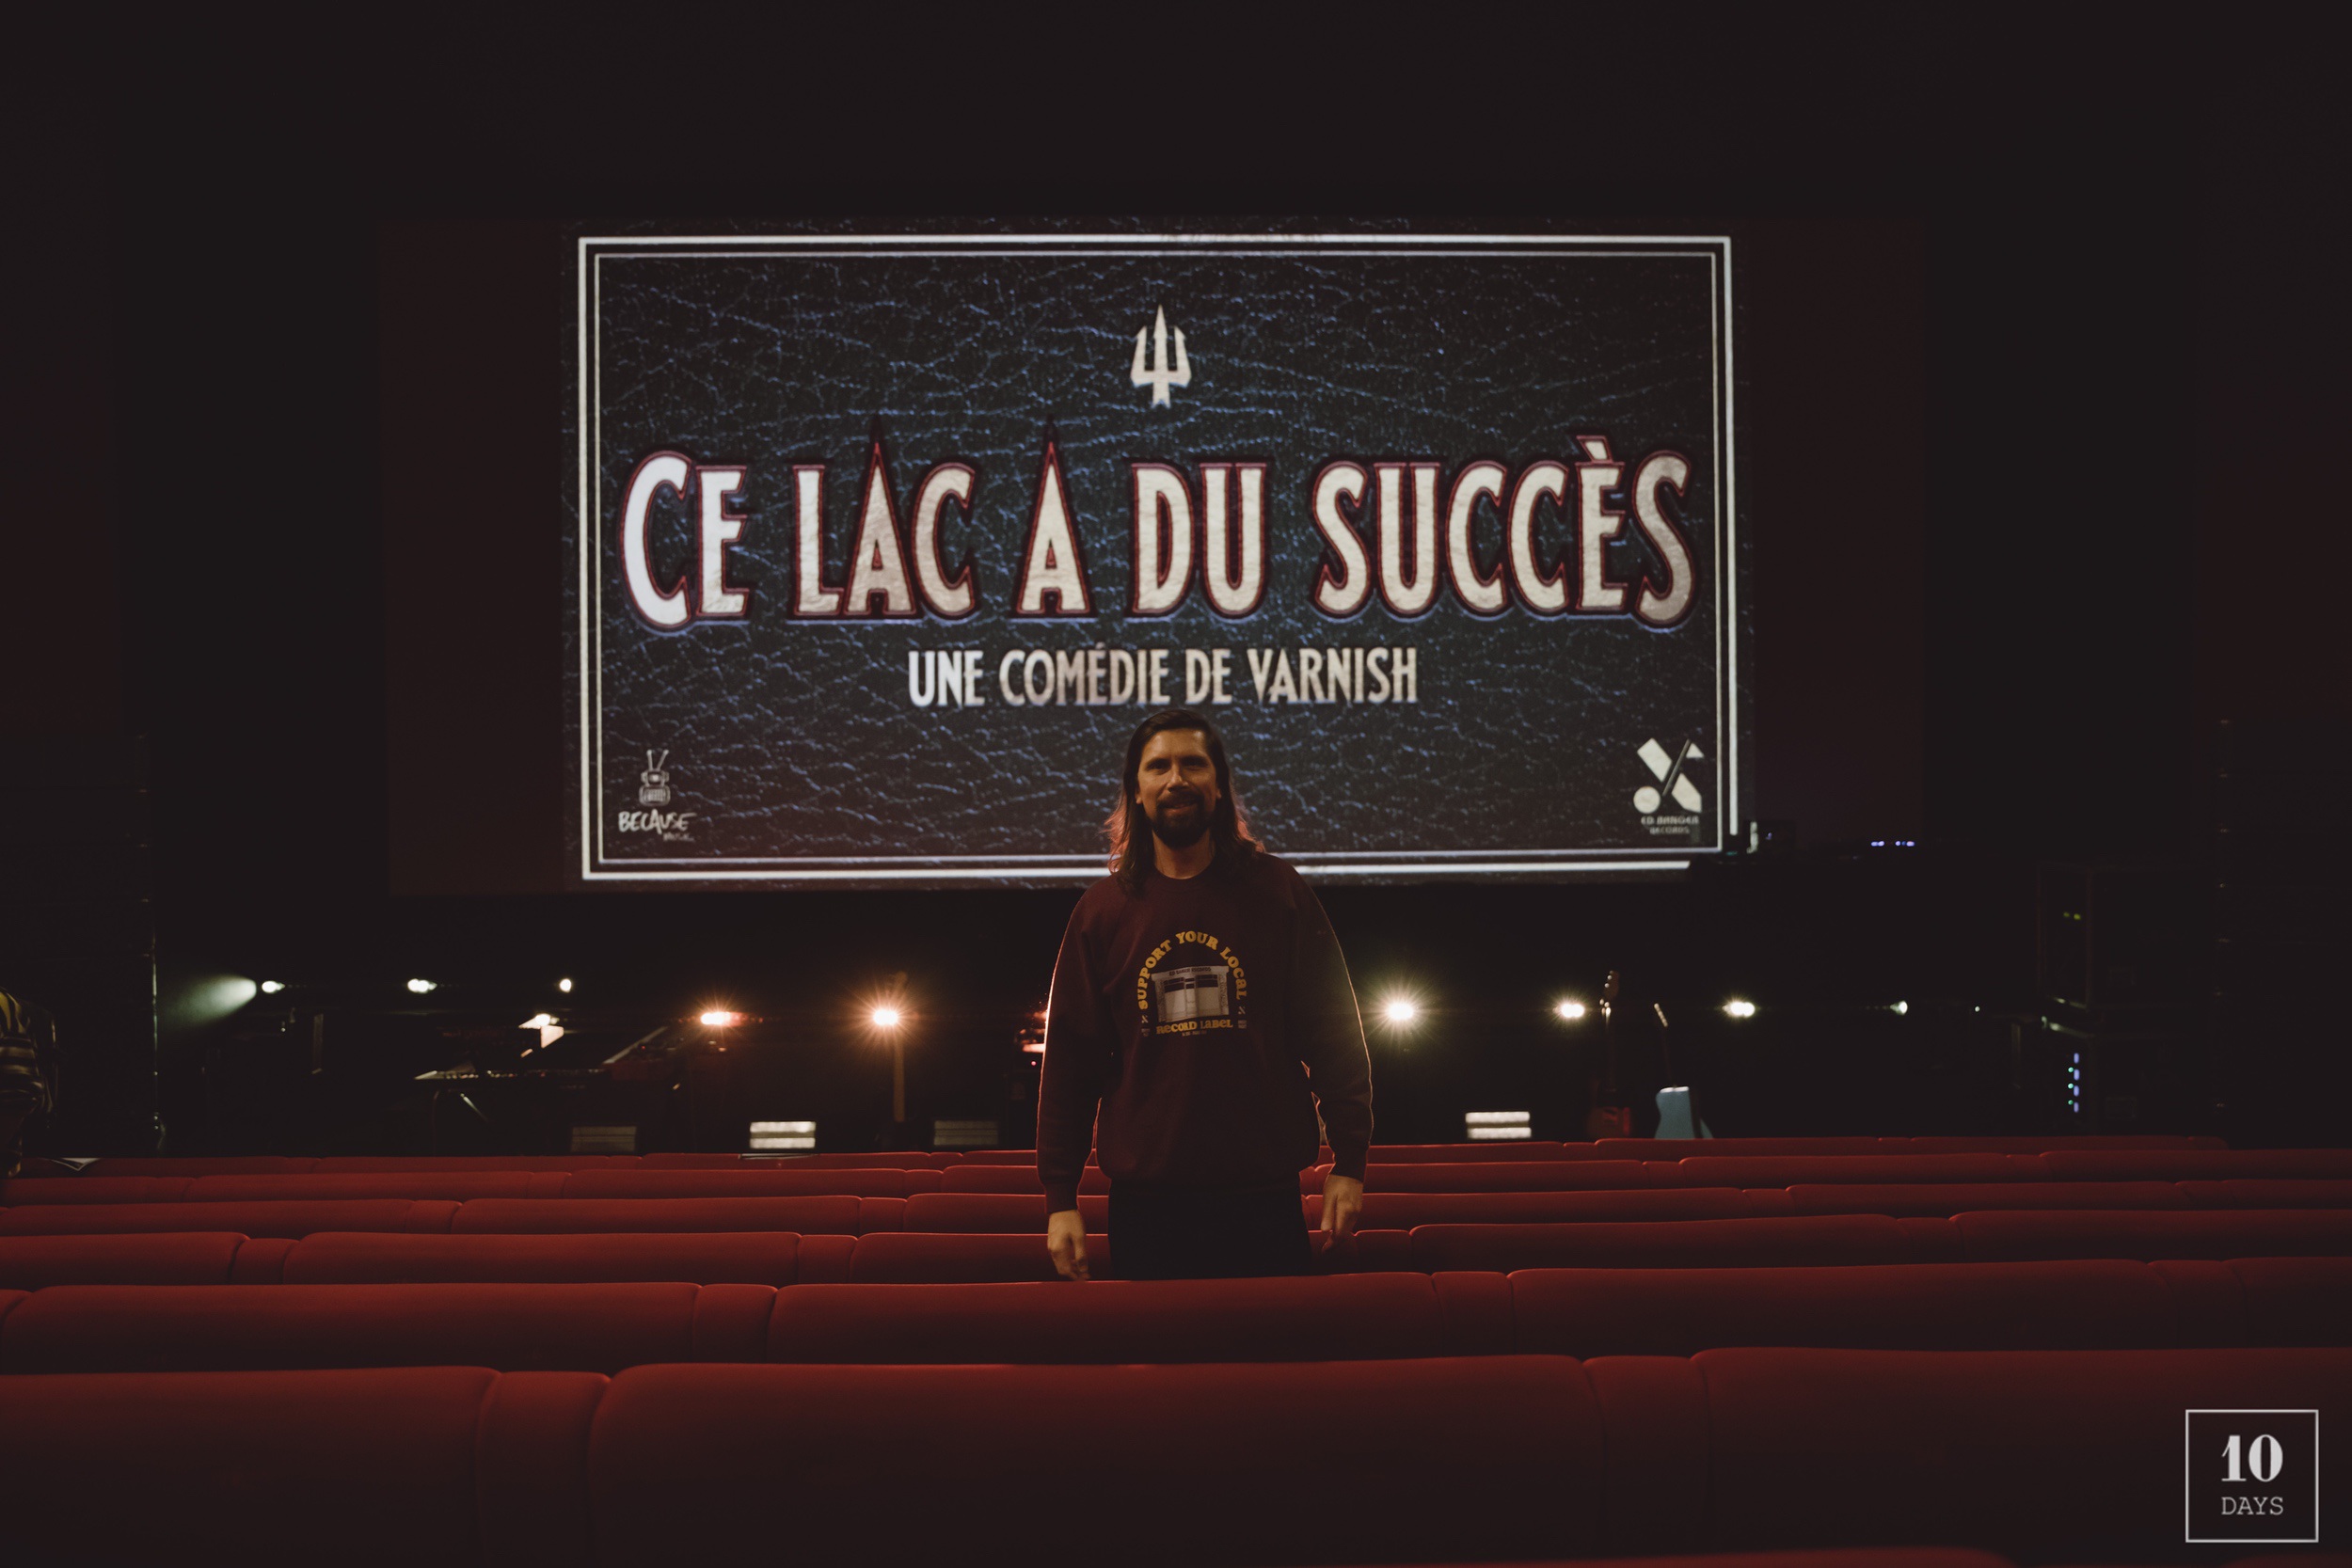 Ed Banger Presents “This Lake Is Successful” by Varnish La Piscine Release Party